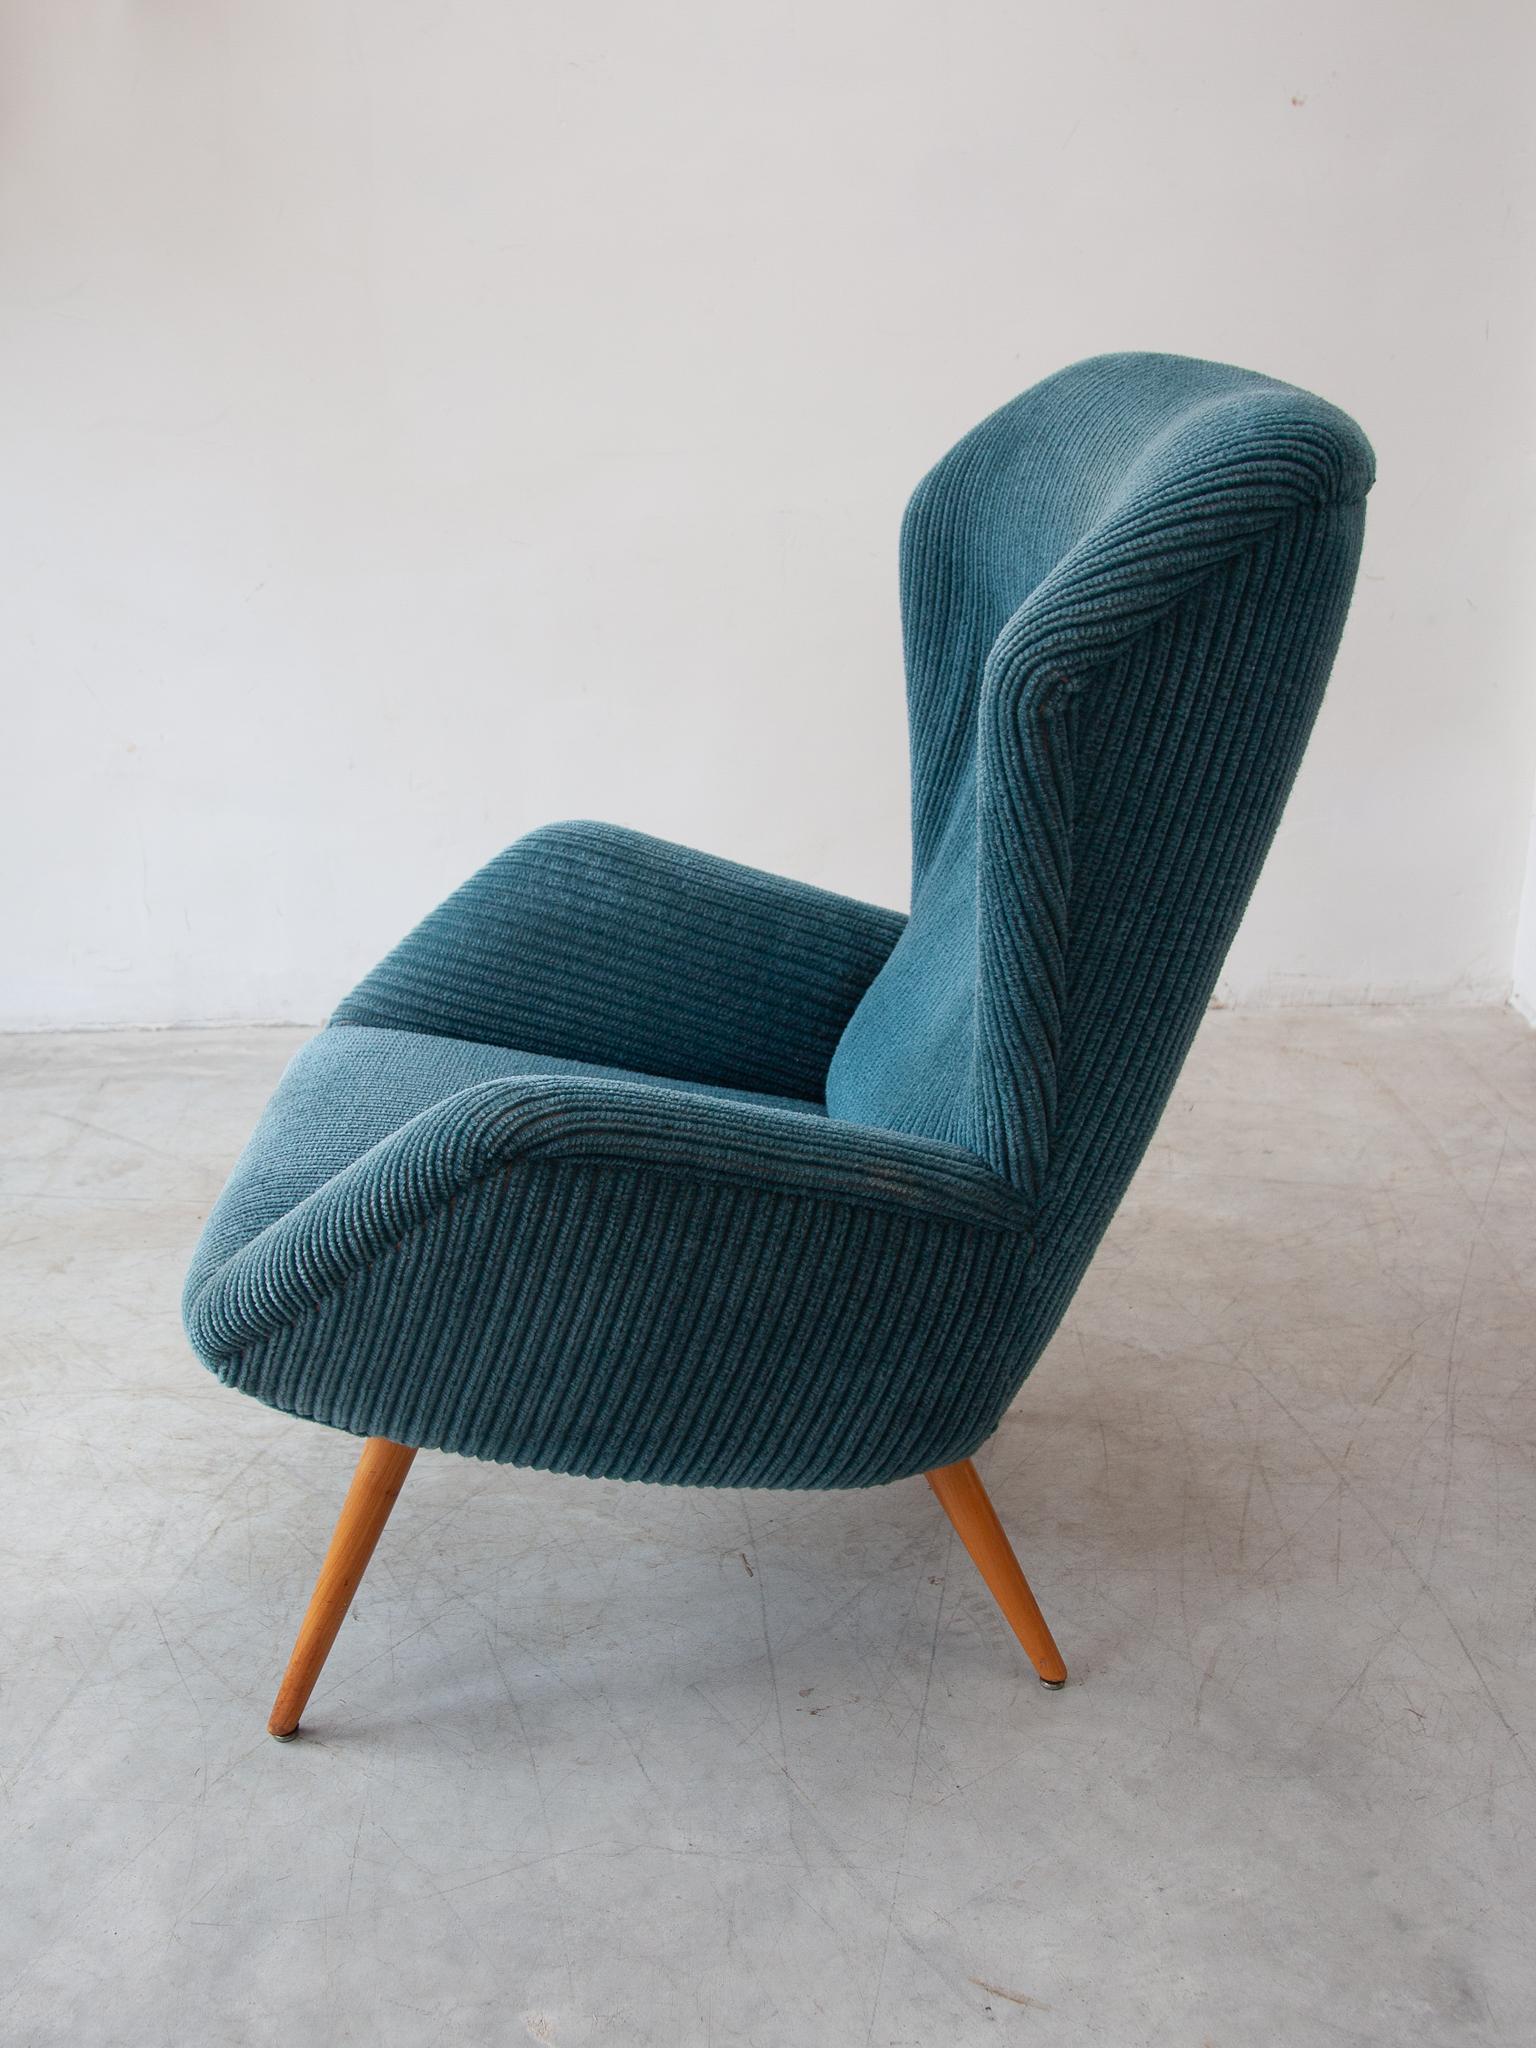 Hand-Crafted High Wingback Lounge Chair, Germany designed by Ernst Jahn, 1950s